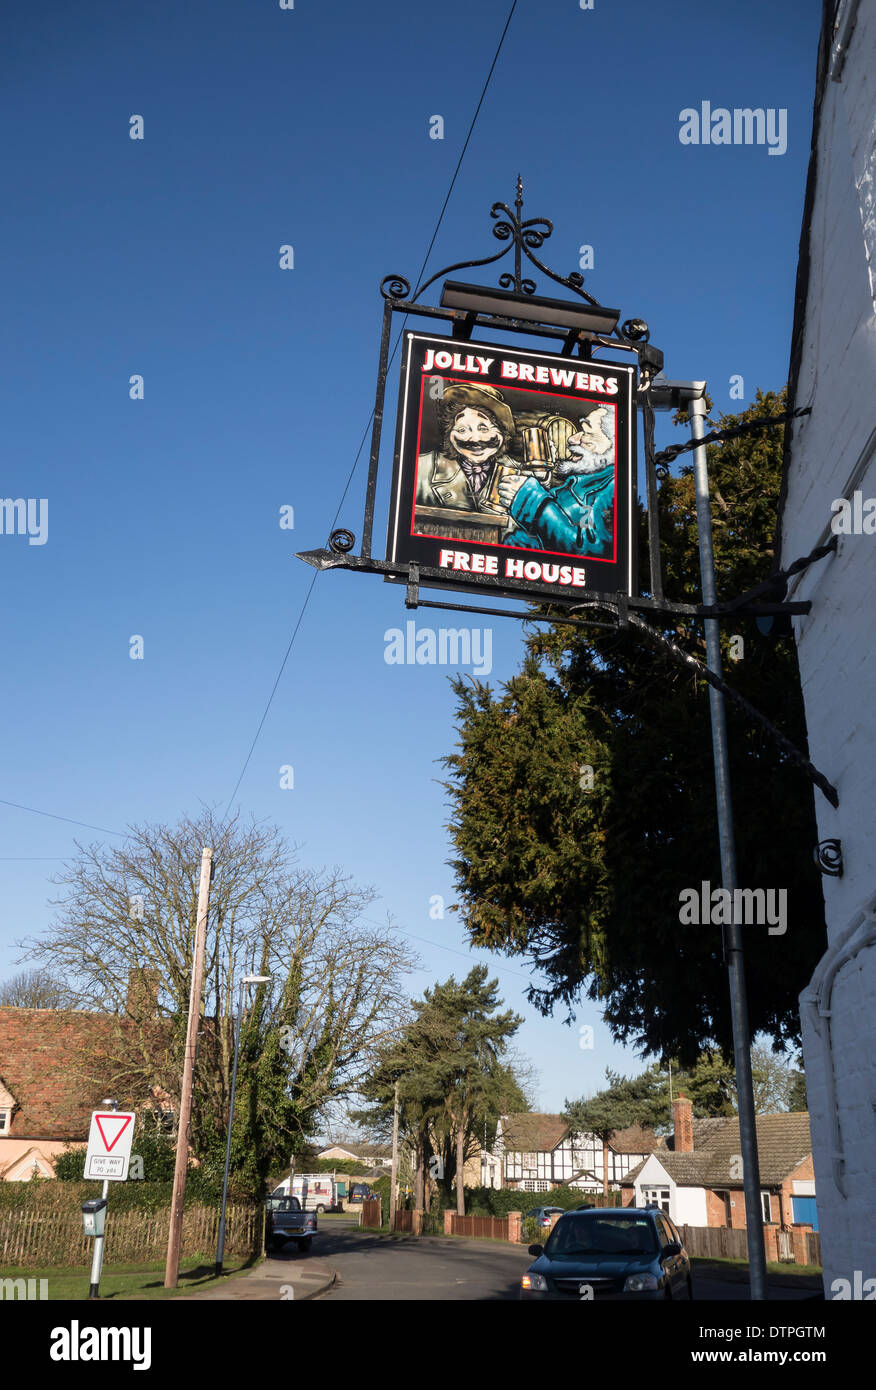 Jolly Brewers pub sign in village setting Milton Stock Photo